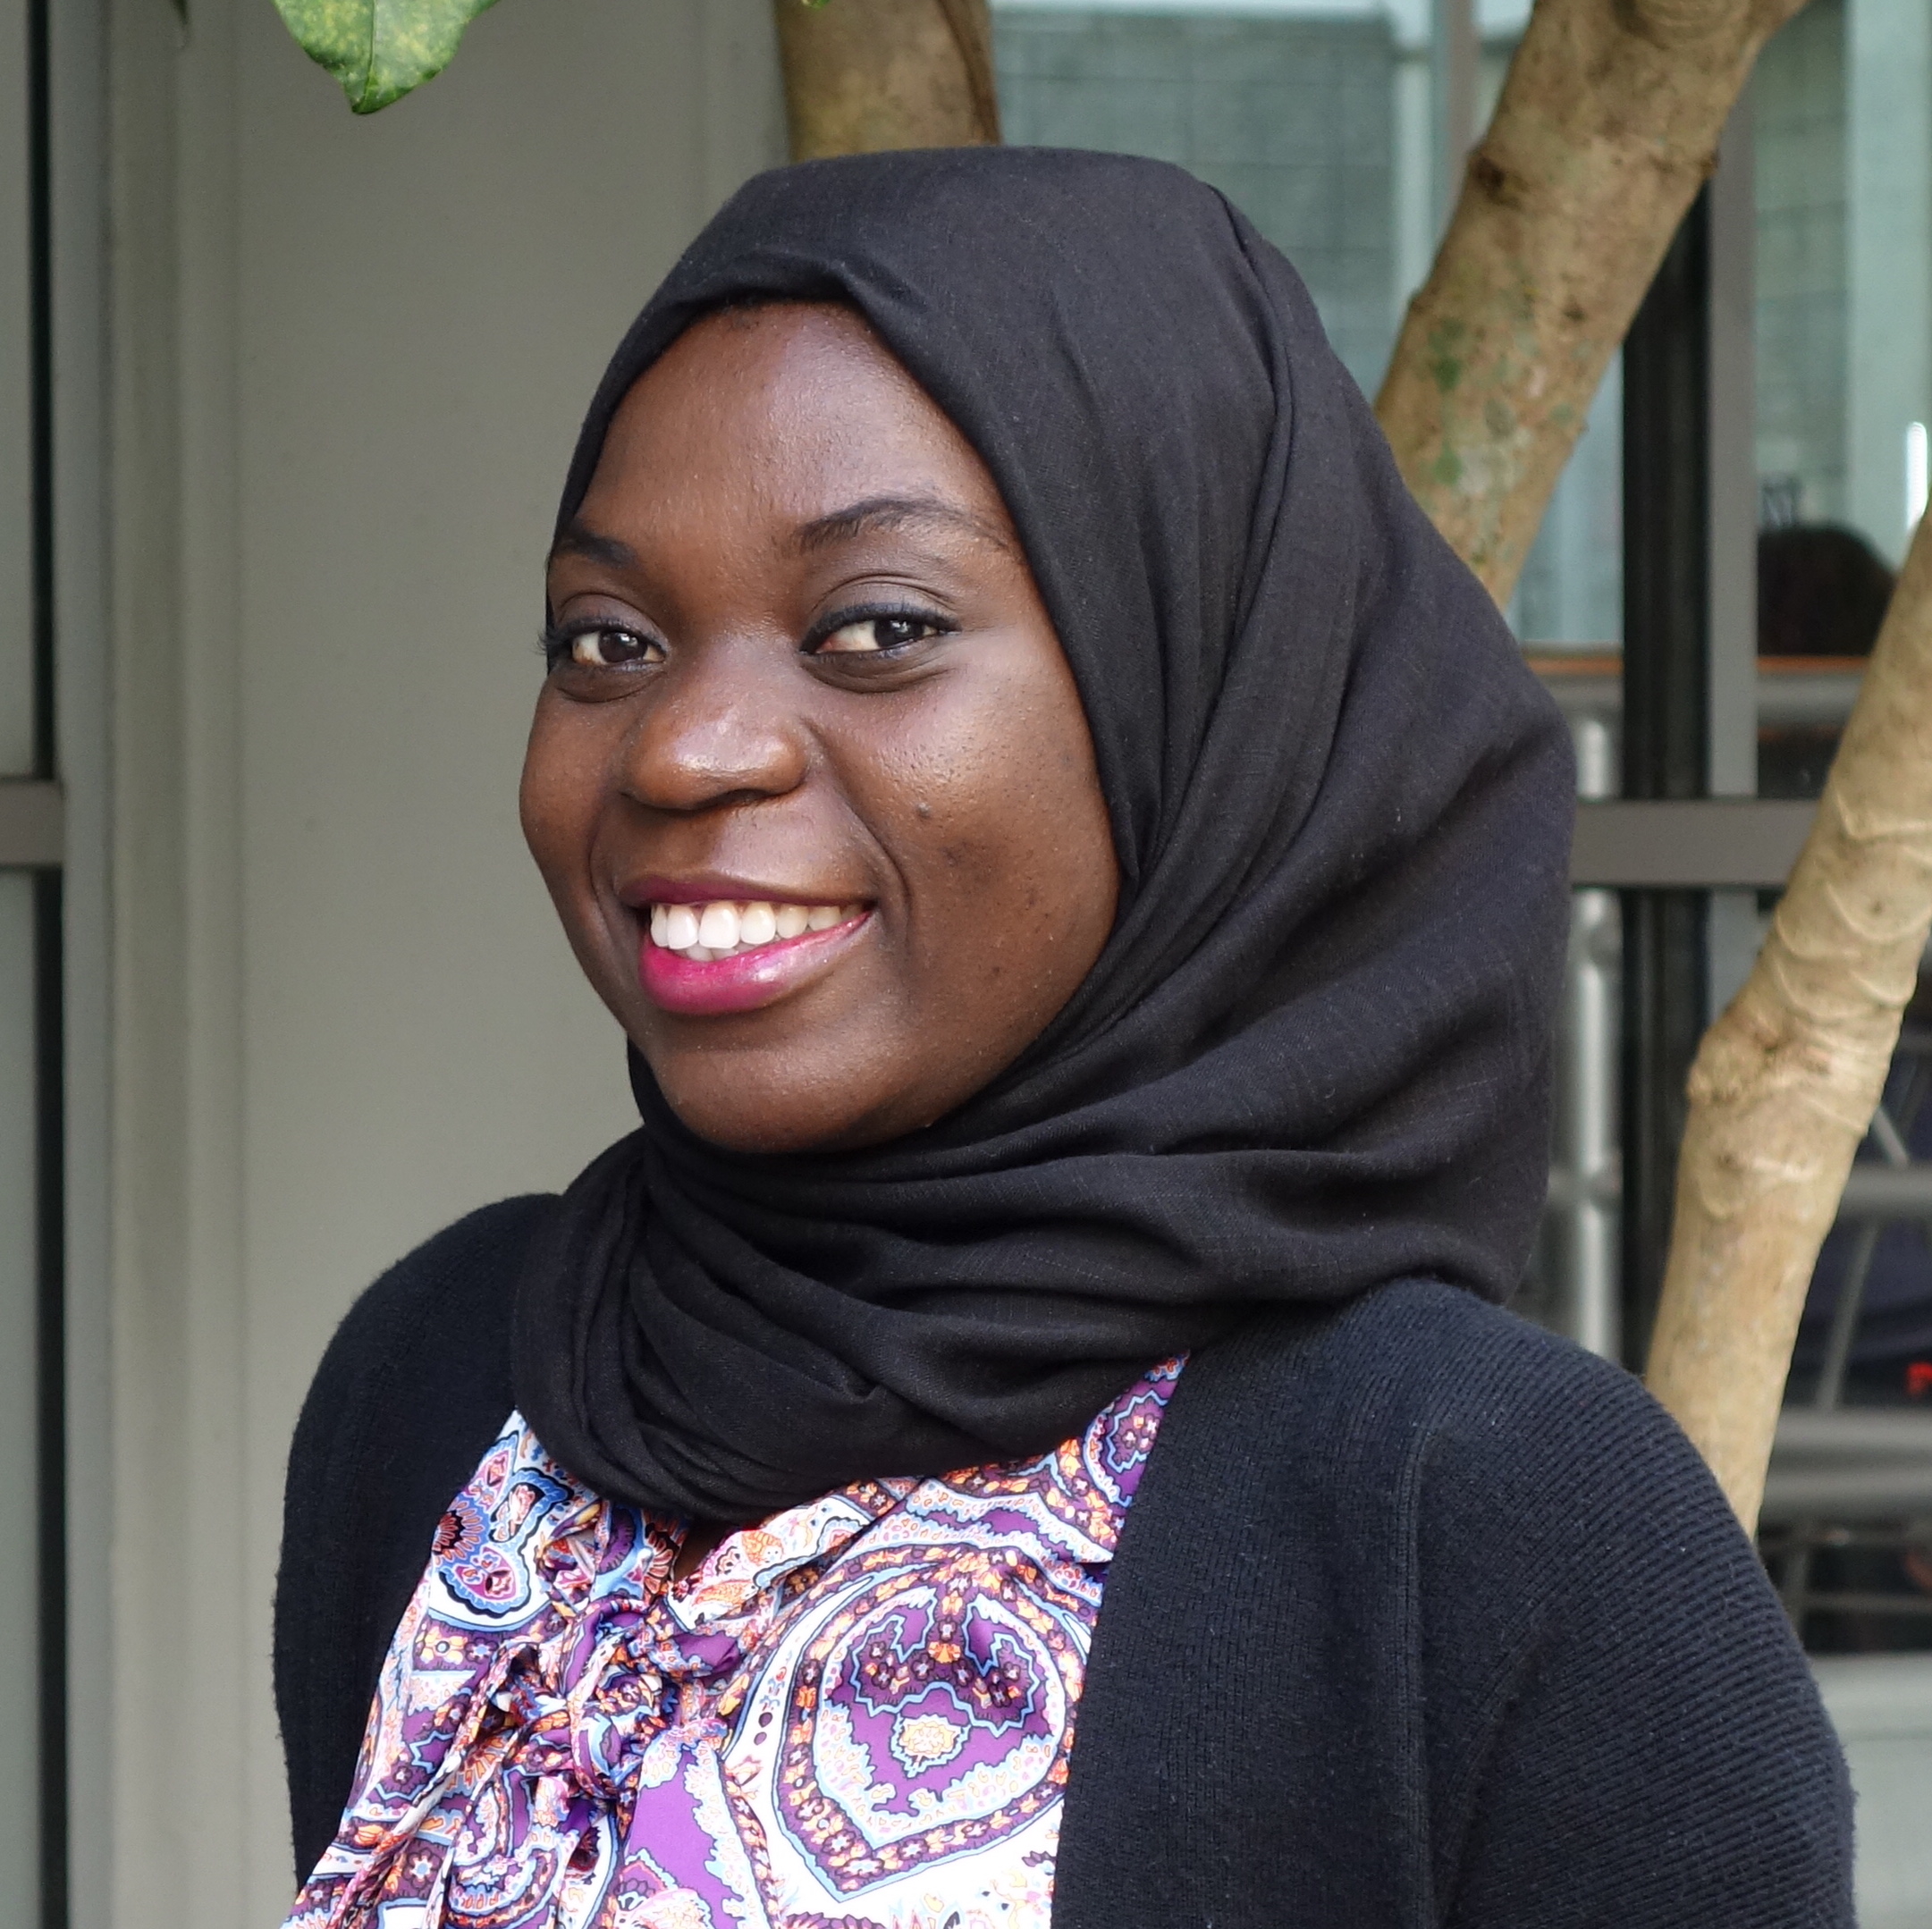 Portrait of Bola Yusef. Bola is a Black woman wearing a black headscarf and purple patterned shirt. She is standing in front of a tree and smiling at the camera.